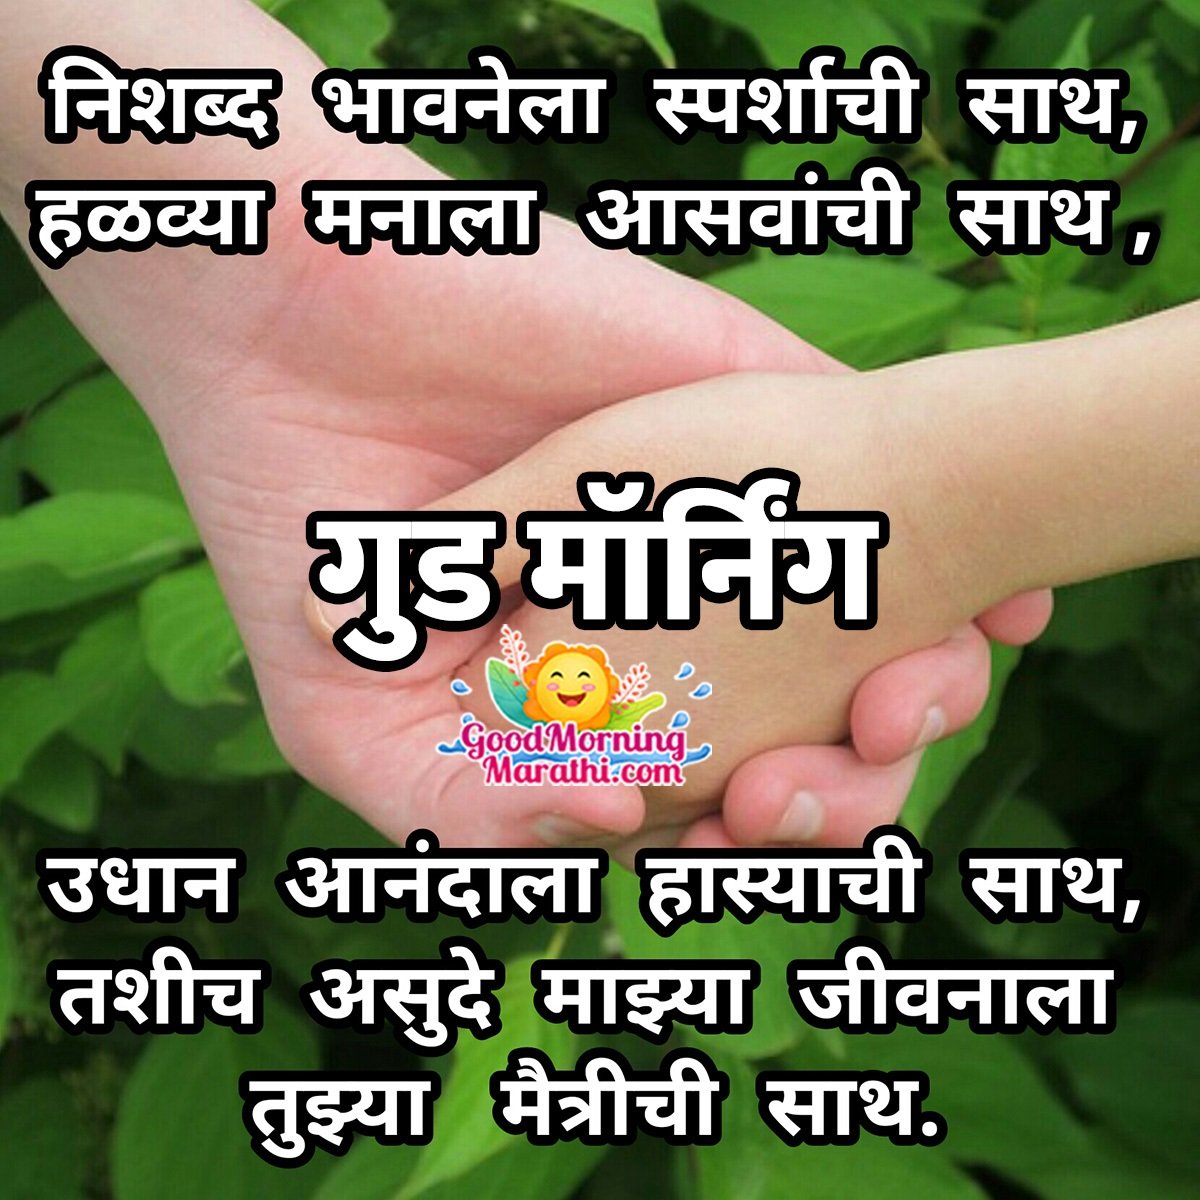 Good Morning Friendship Quotes in Marathi